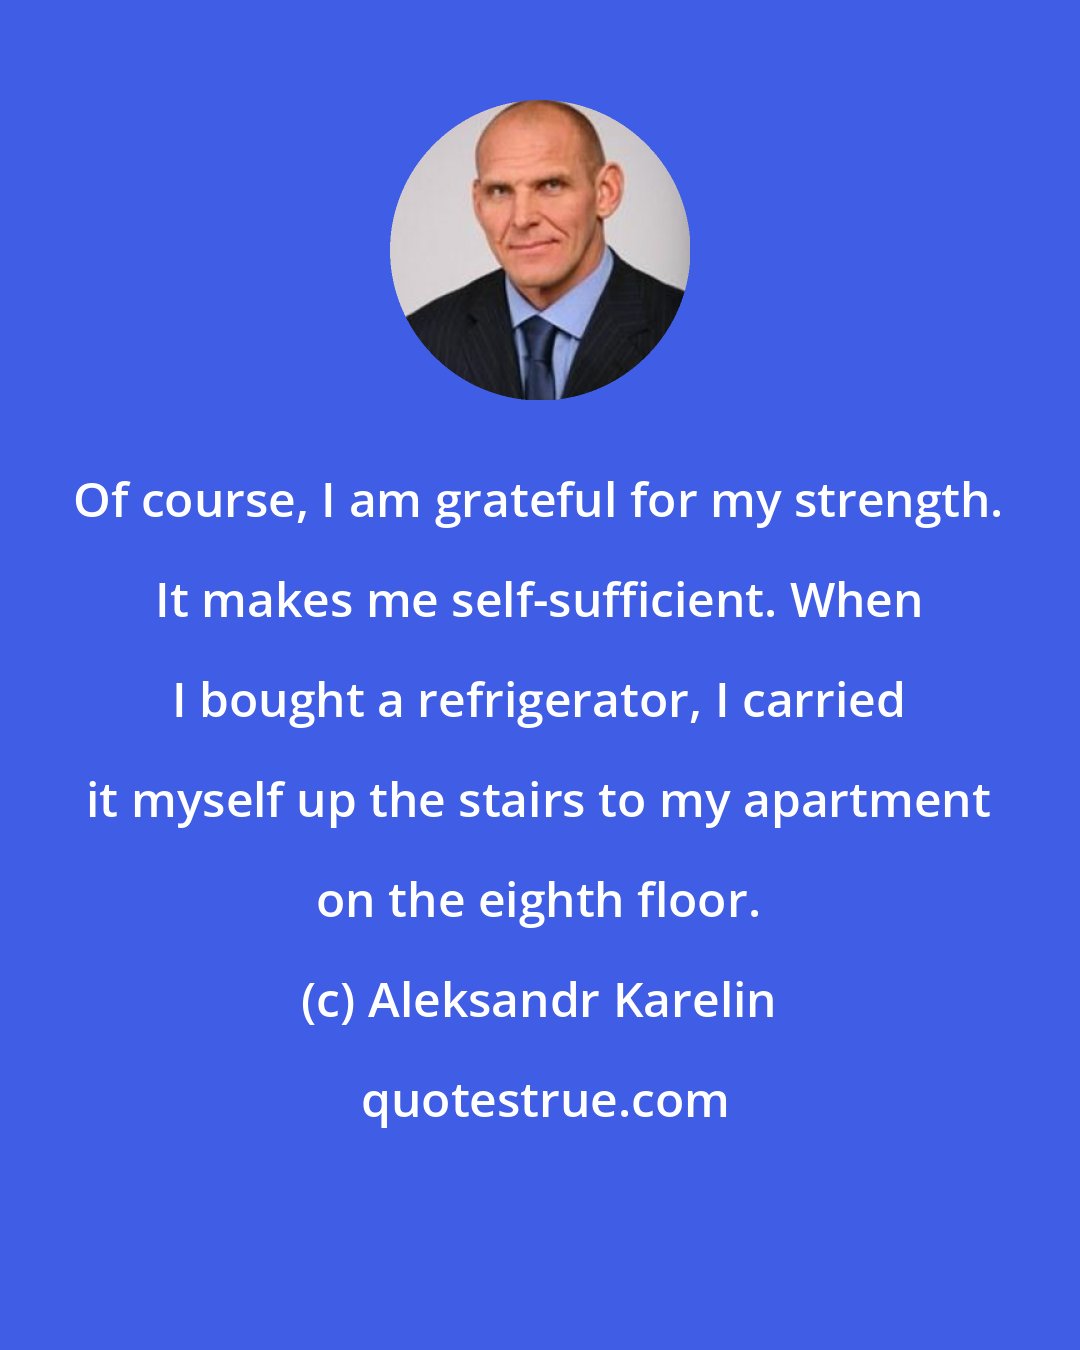 Aleksandr Karelin: Of course, I am grateful for my strength. It makes me self-sufficient. When I bought a refrigerator, I carried it myself up the stairs to my apartment on the eighth floor.